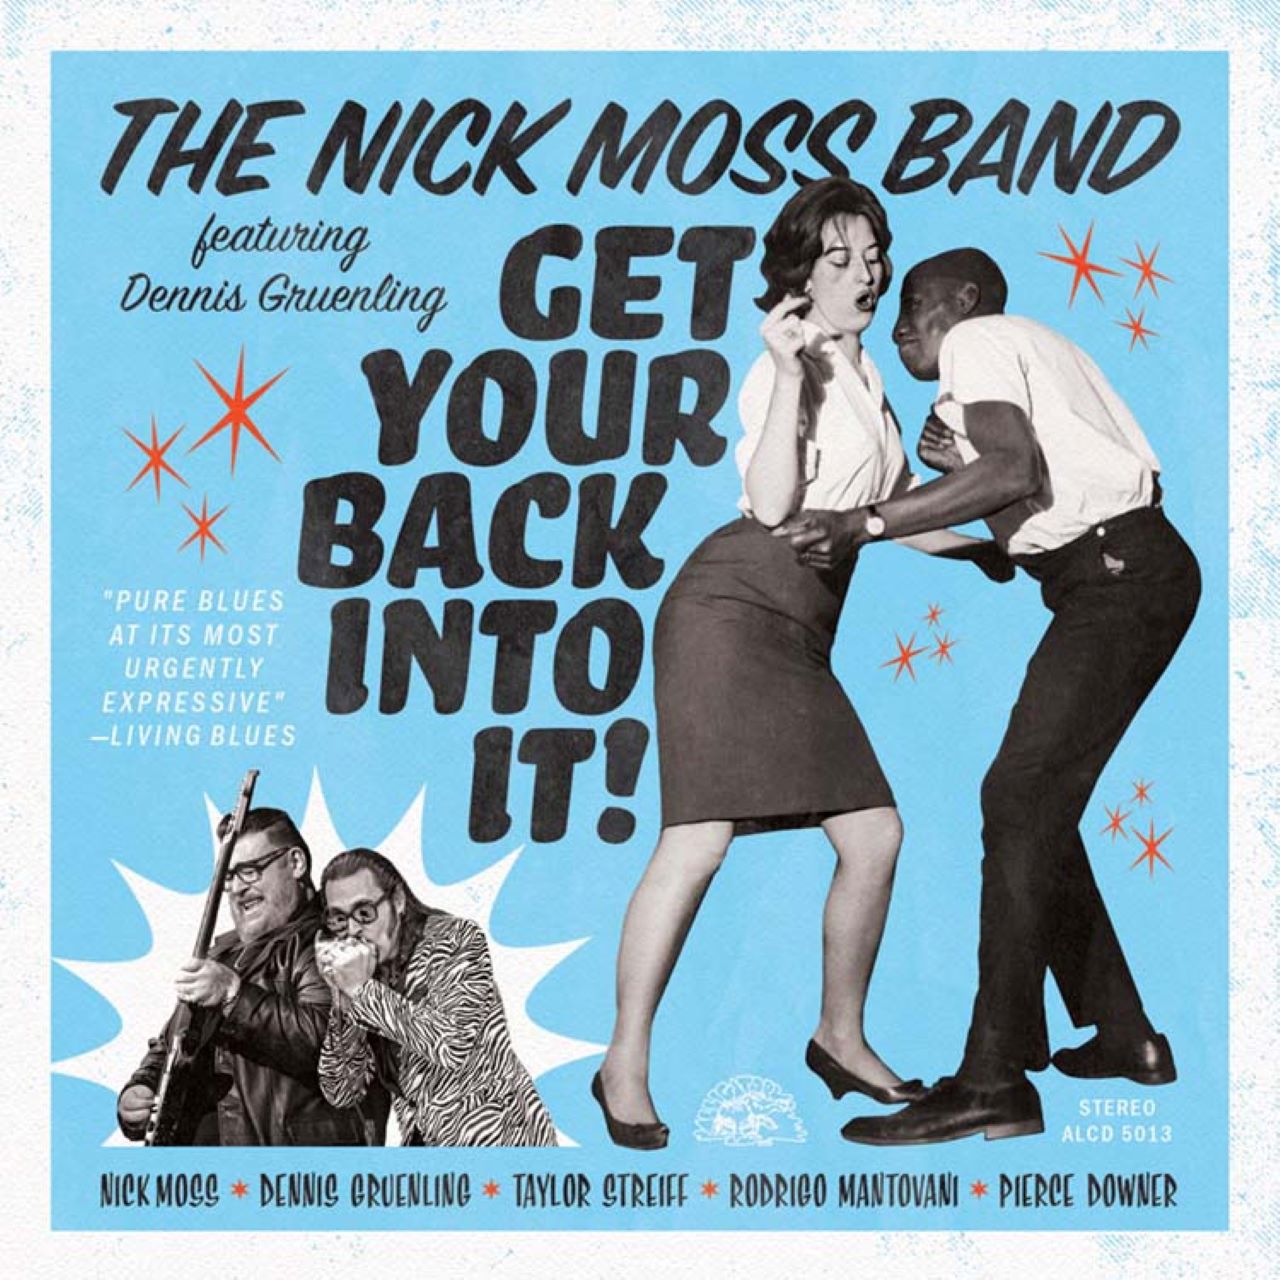 Nick Moss Band - Get Your Back Into It cover album